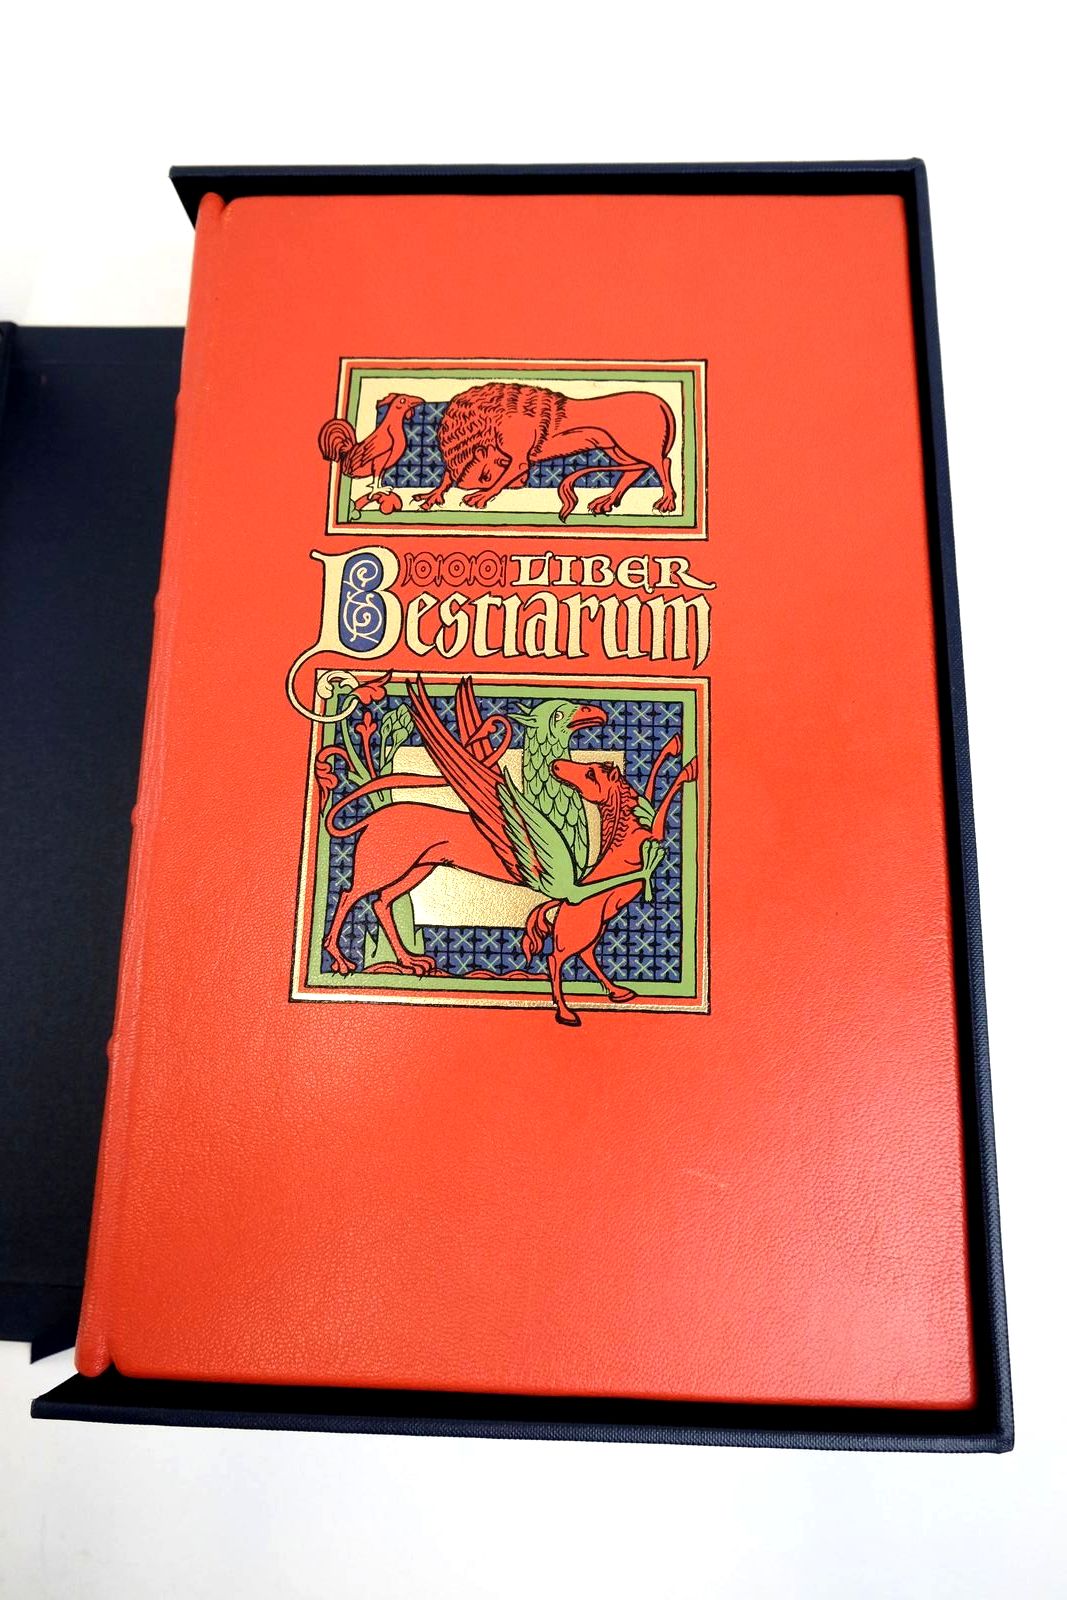 Photo of LIBER BESTIARUM written by De Hamel, Christopher
Barber, Richard published by Folio Society (STOCK CODE: 1321645)  for sale by Stella & Rose's Books